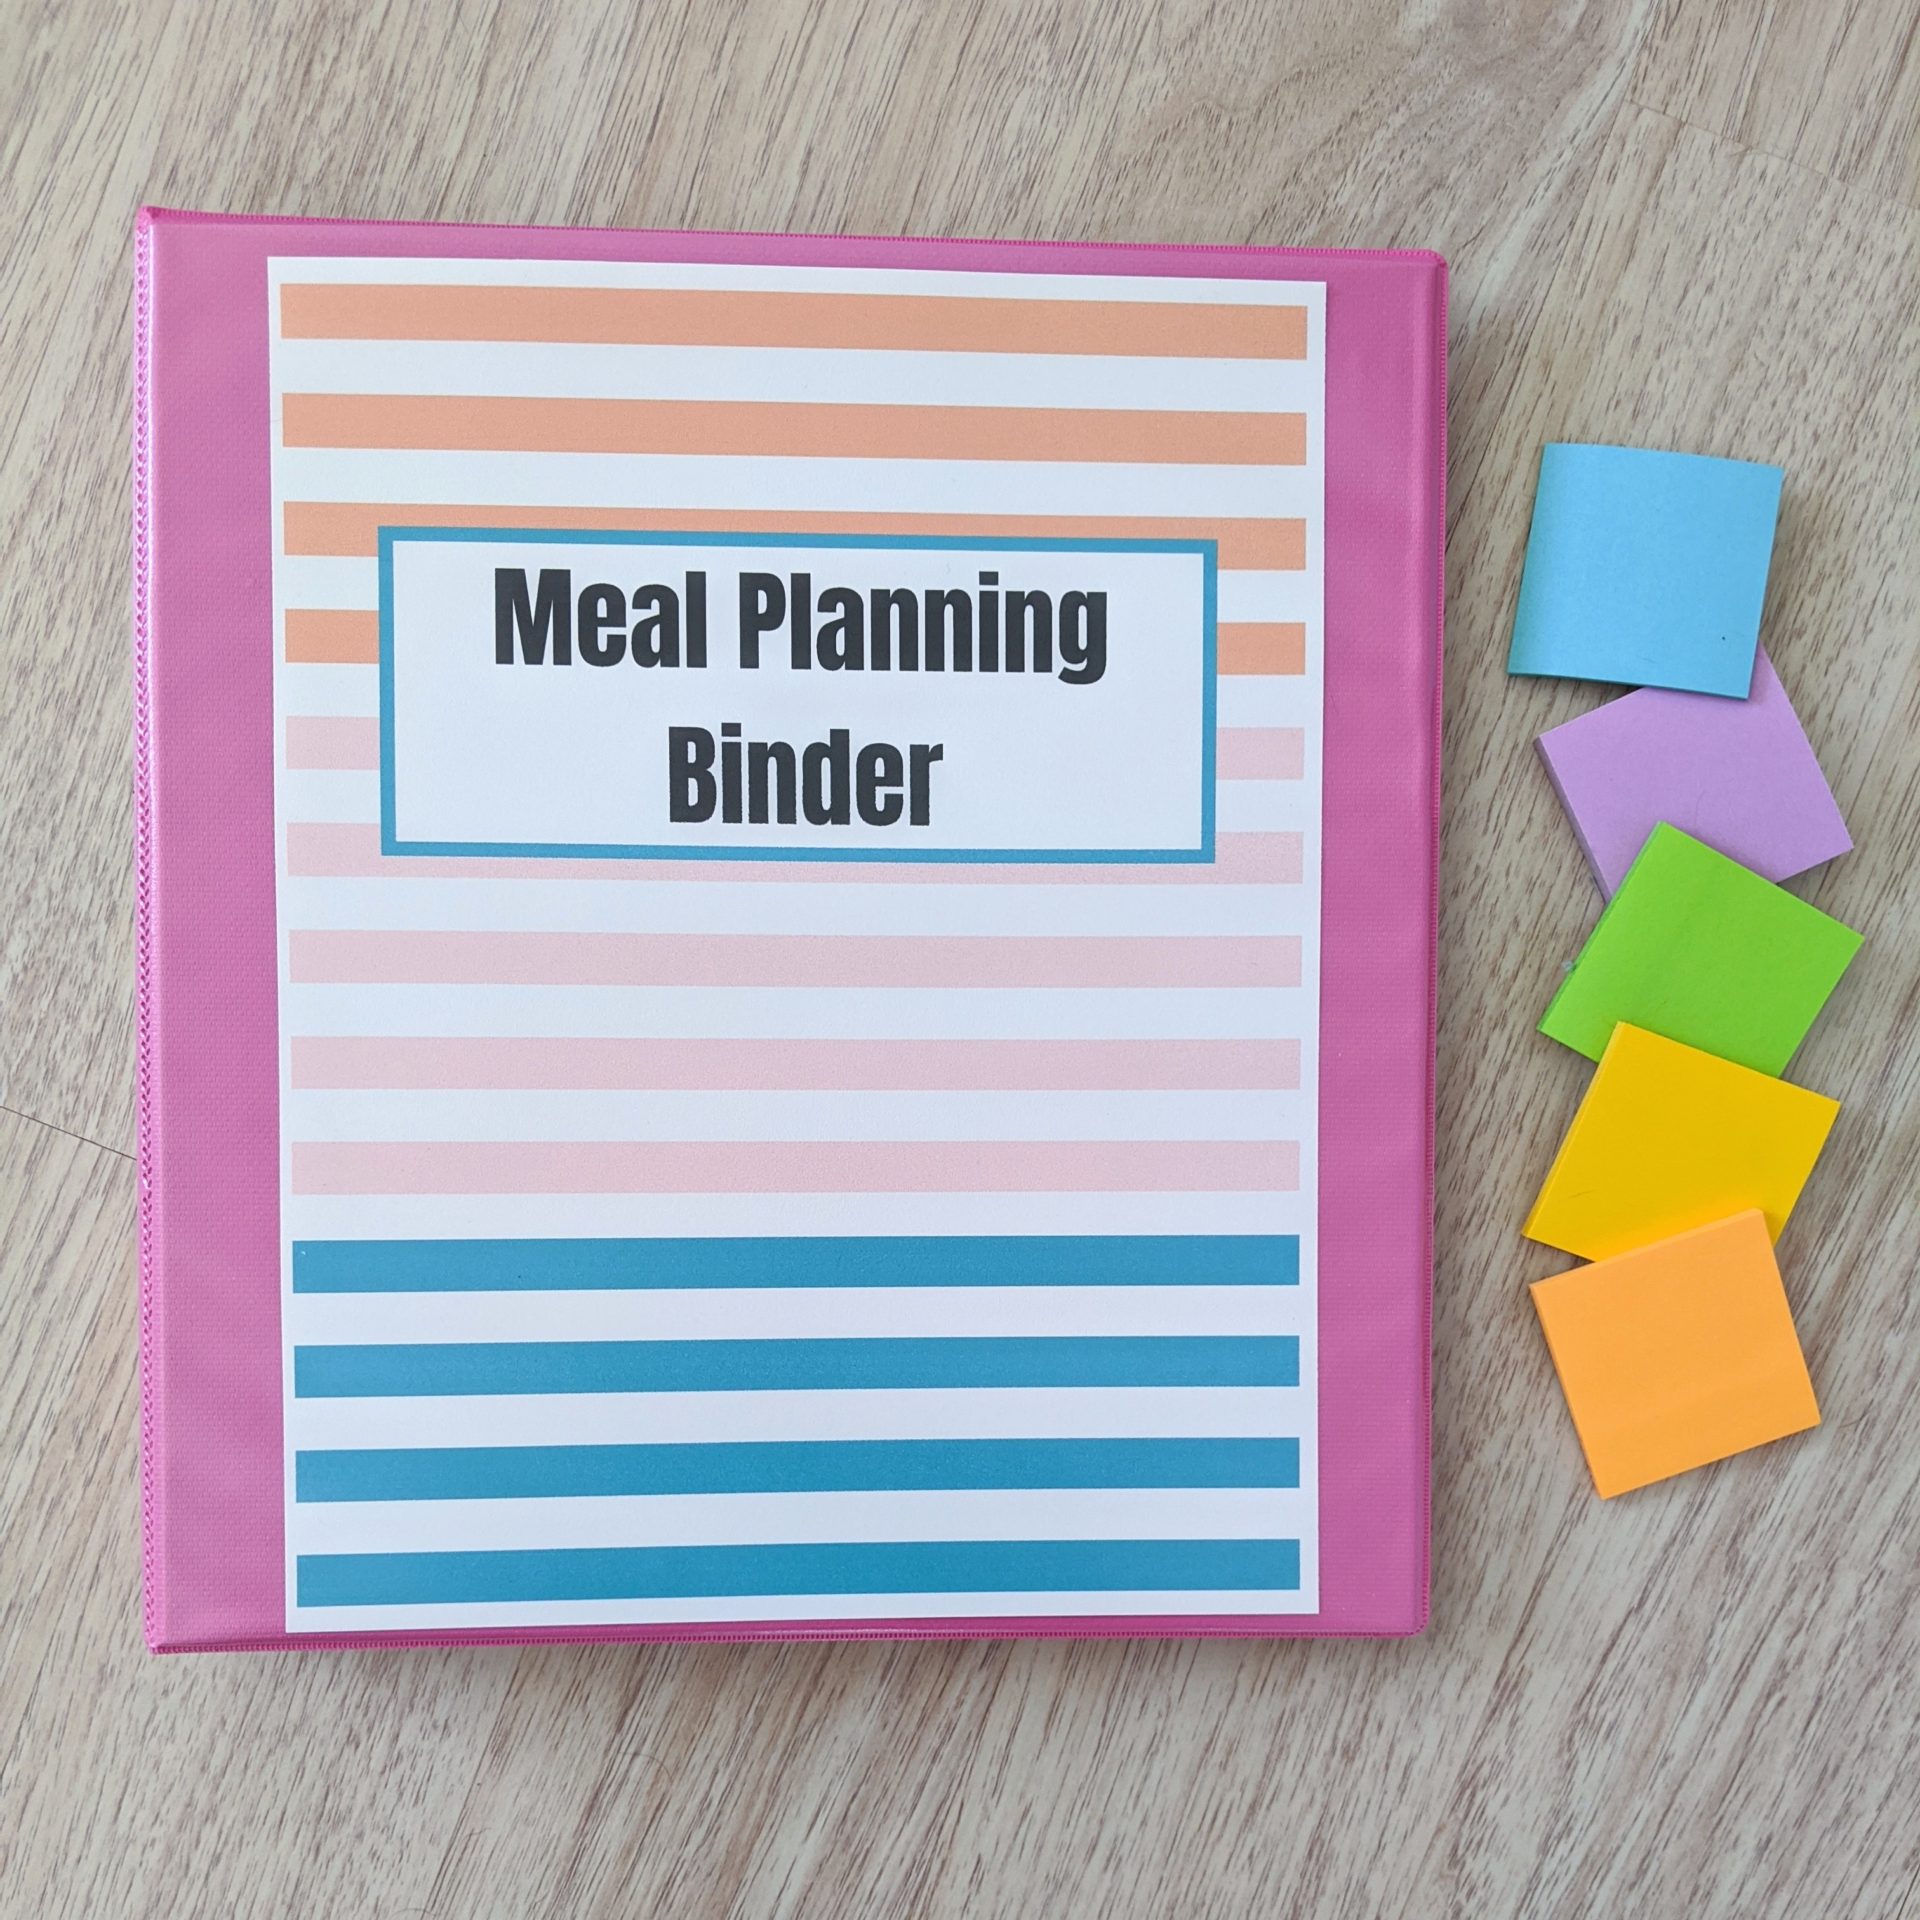 I Made A DIY Recipe Binder And It Changed The Way I Plan Meals